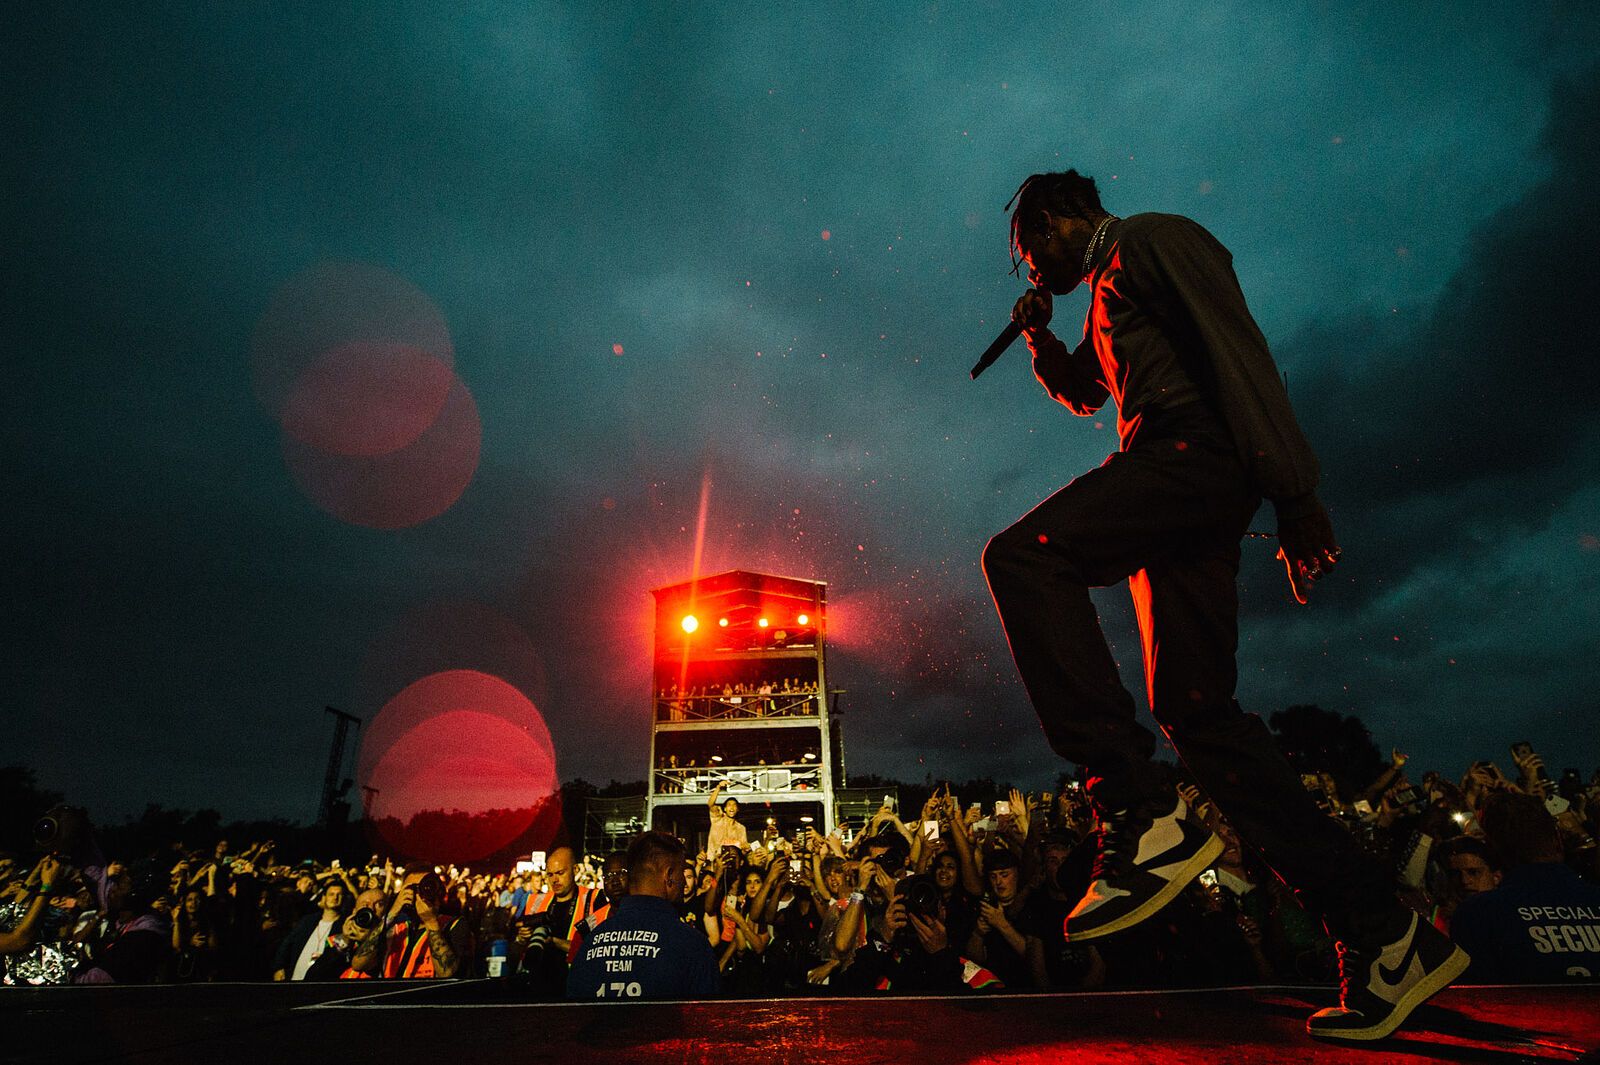 A man on stage performing for an audience - Travis Scott